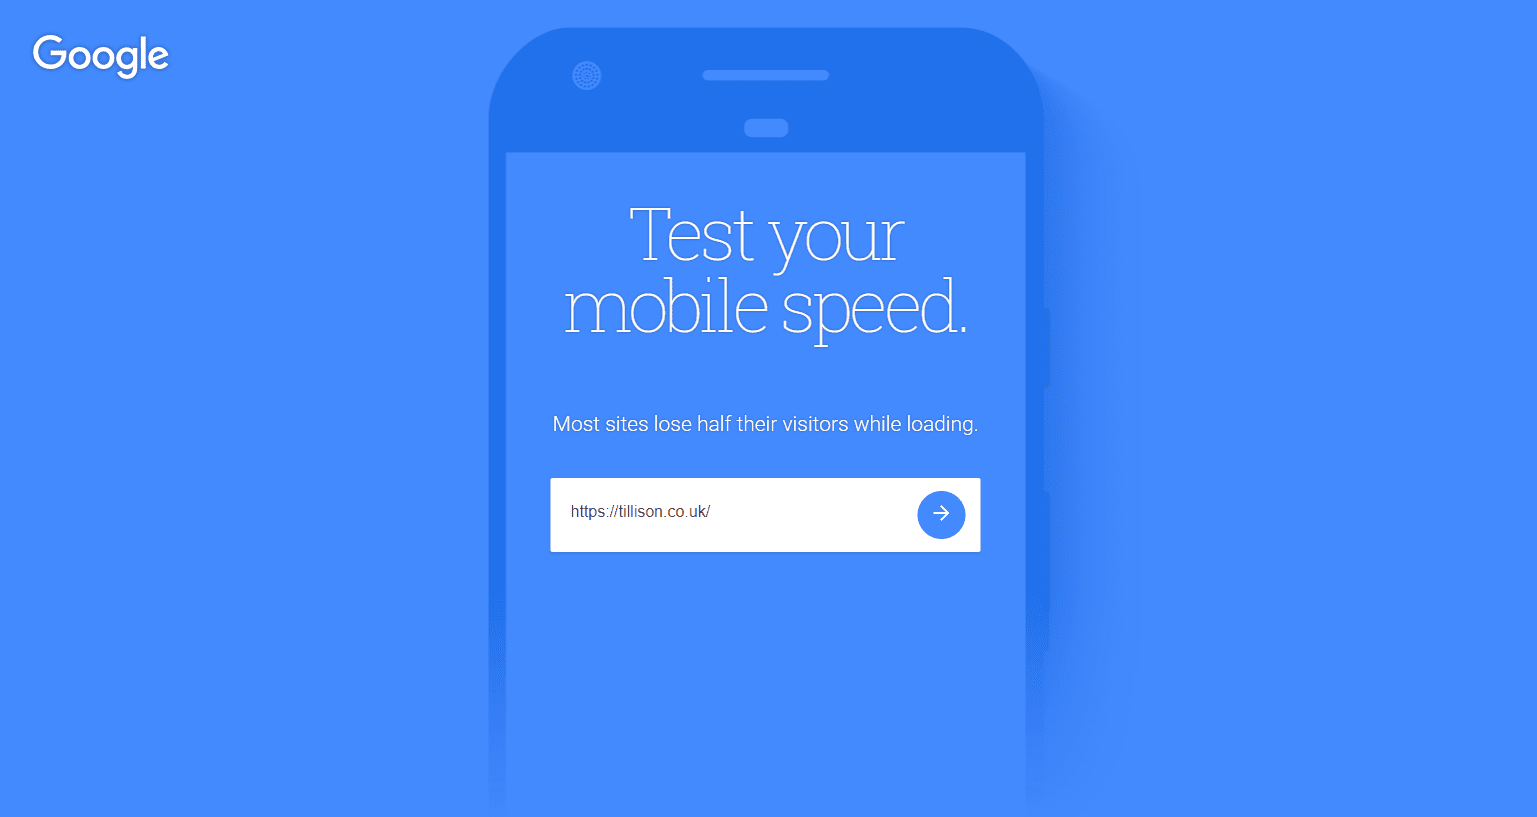 Google's Test My Site tool is a free and easy way of testing your site for mobile site speed optimisation